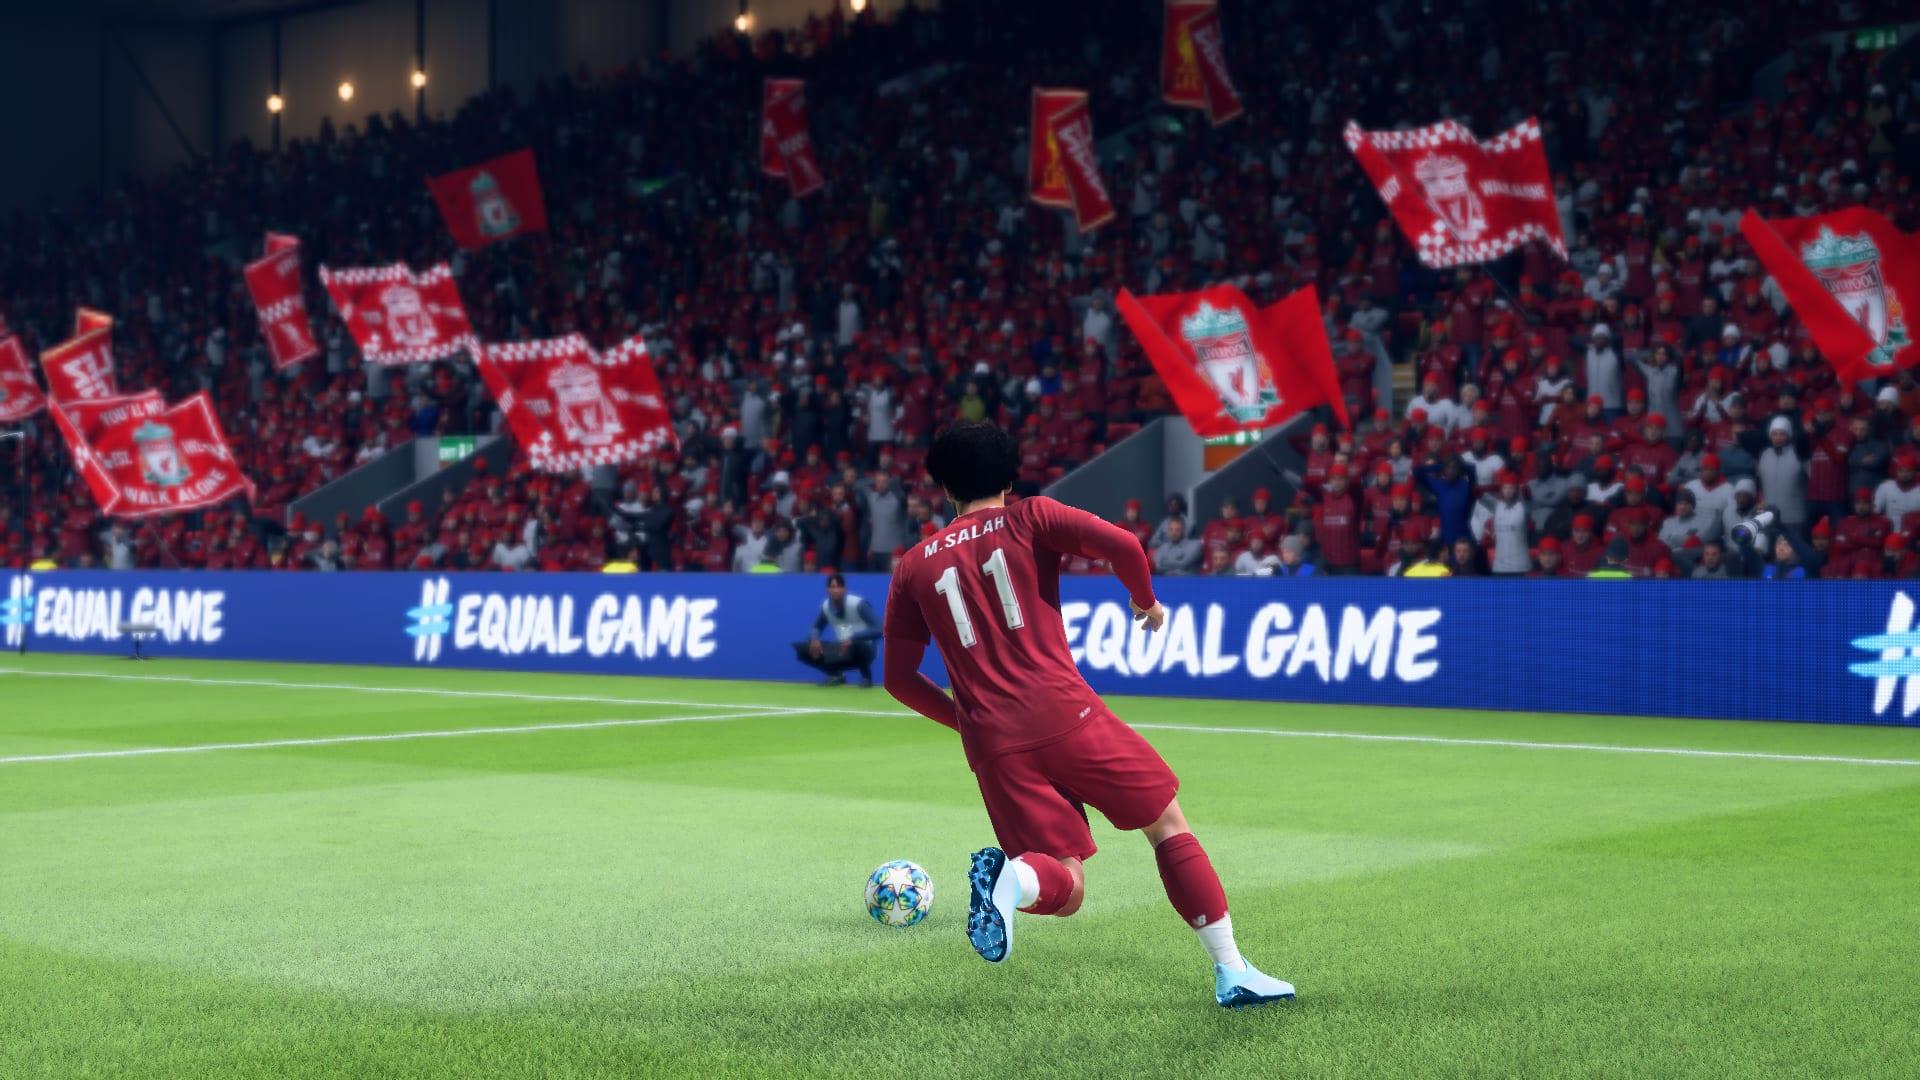 Mohamed Salah headlined RTTF team 1, and has already earned an upgrade. Who joins him in Team 3?